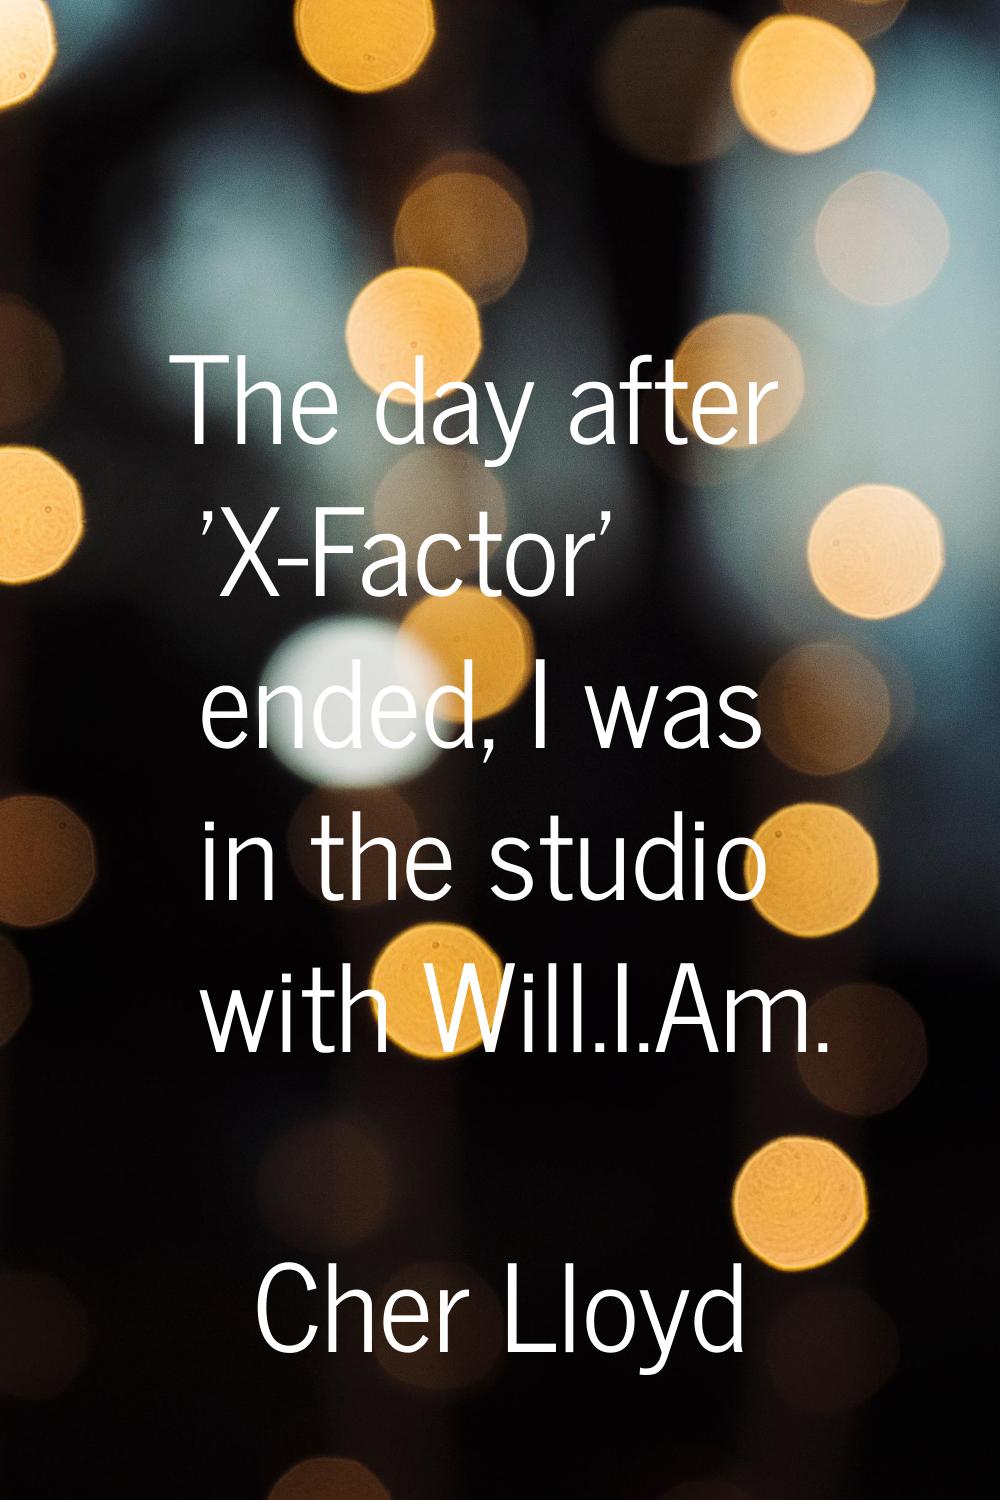 The day after 'X-Factor' ended, I was in the studio with Will.I.Am.